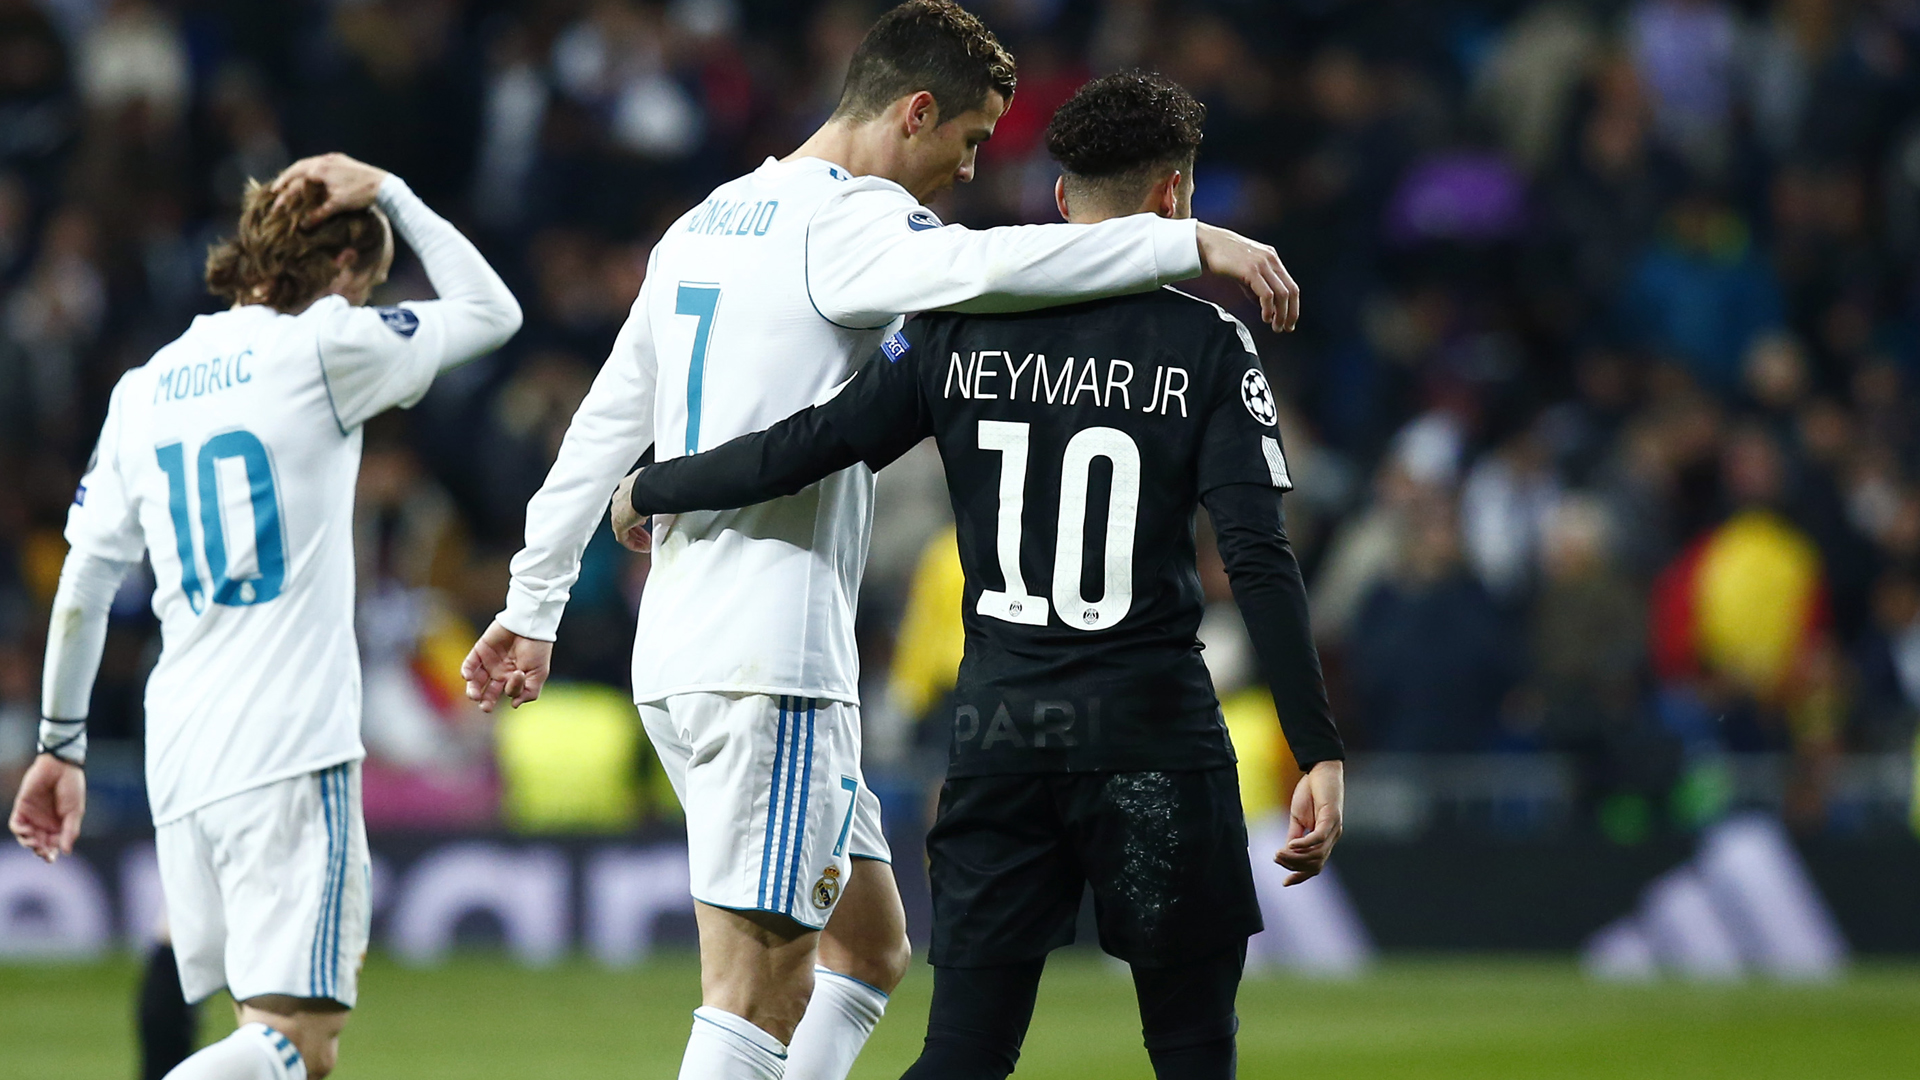 Neymar and Ronaldo would get along very well